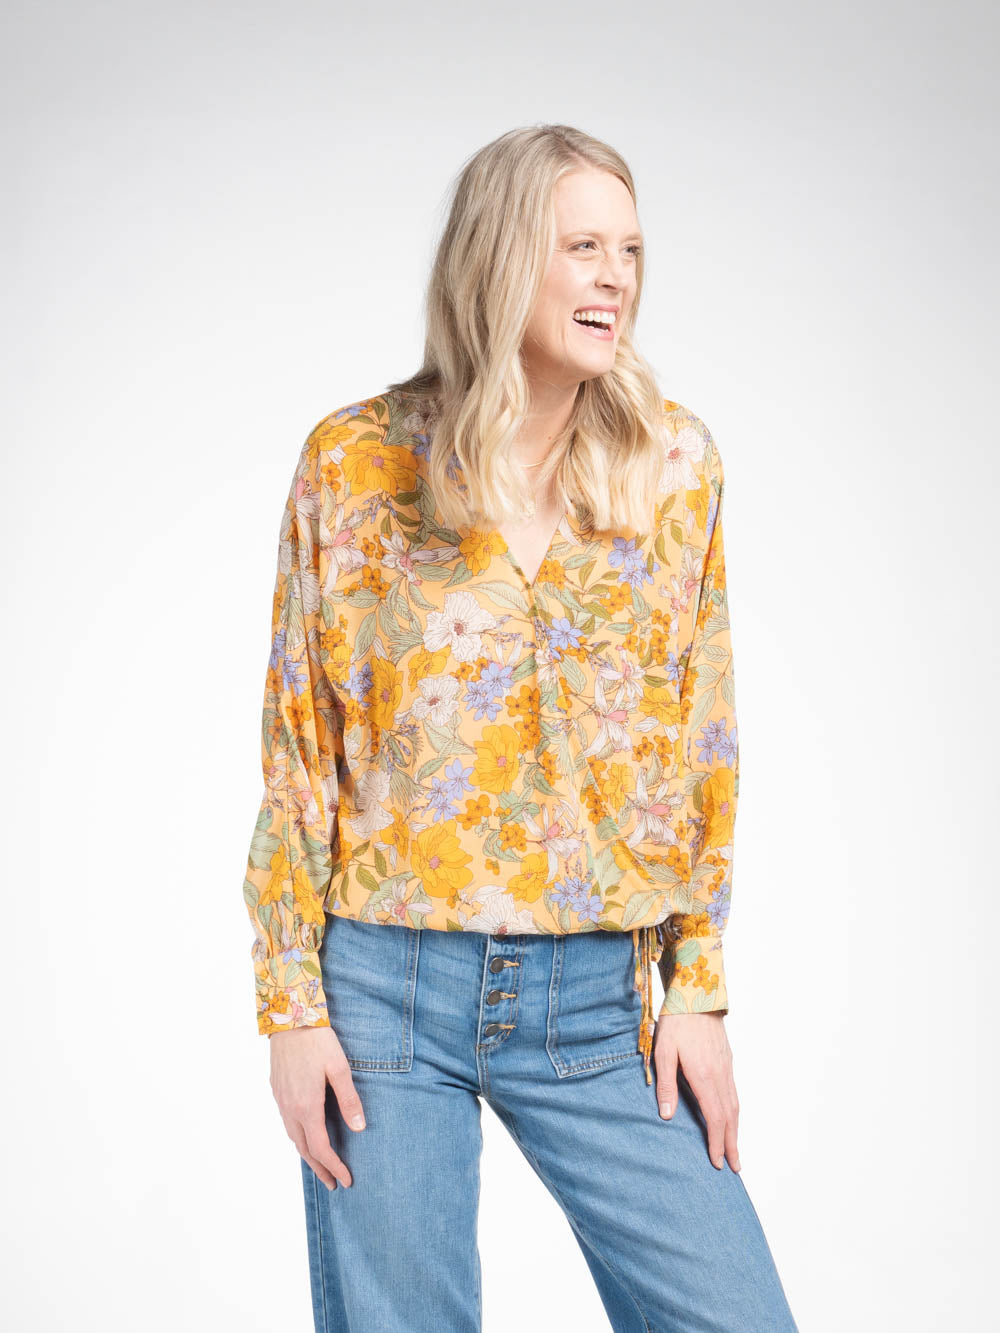 Floral Tops for Tall Girls